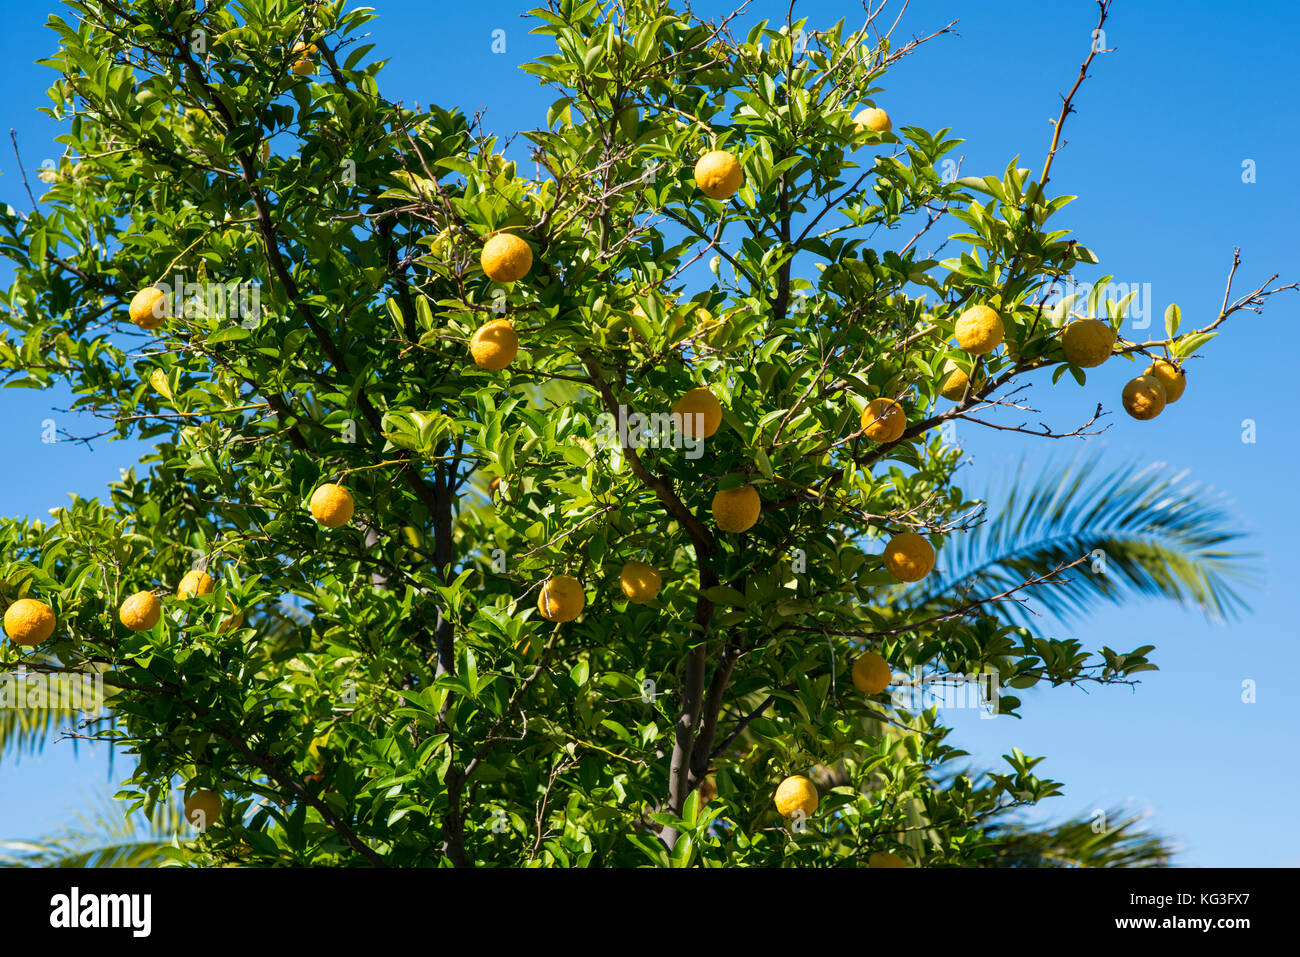 Lemon tree and fruit. Lemons grow well in Australia and are often garden ornamental trees used for convenient culinary supplies and to provide shade. Stock Photo